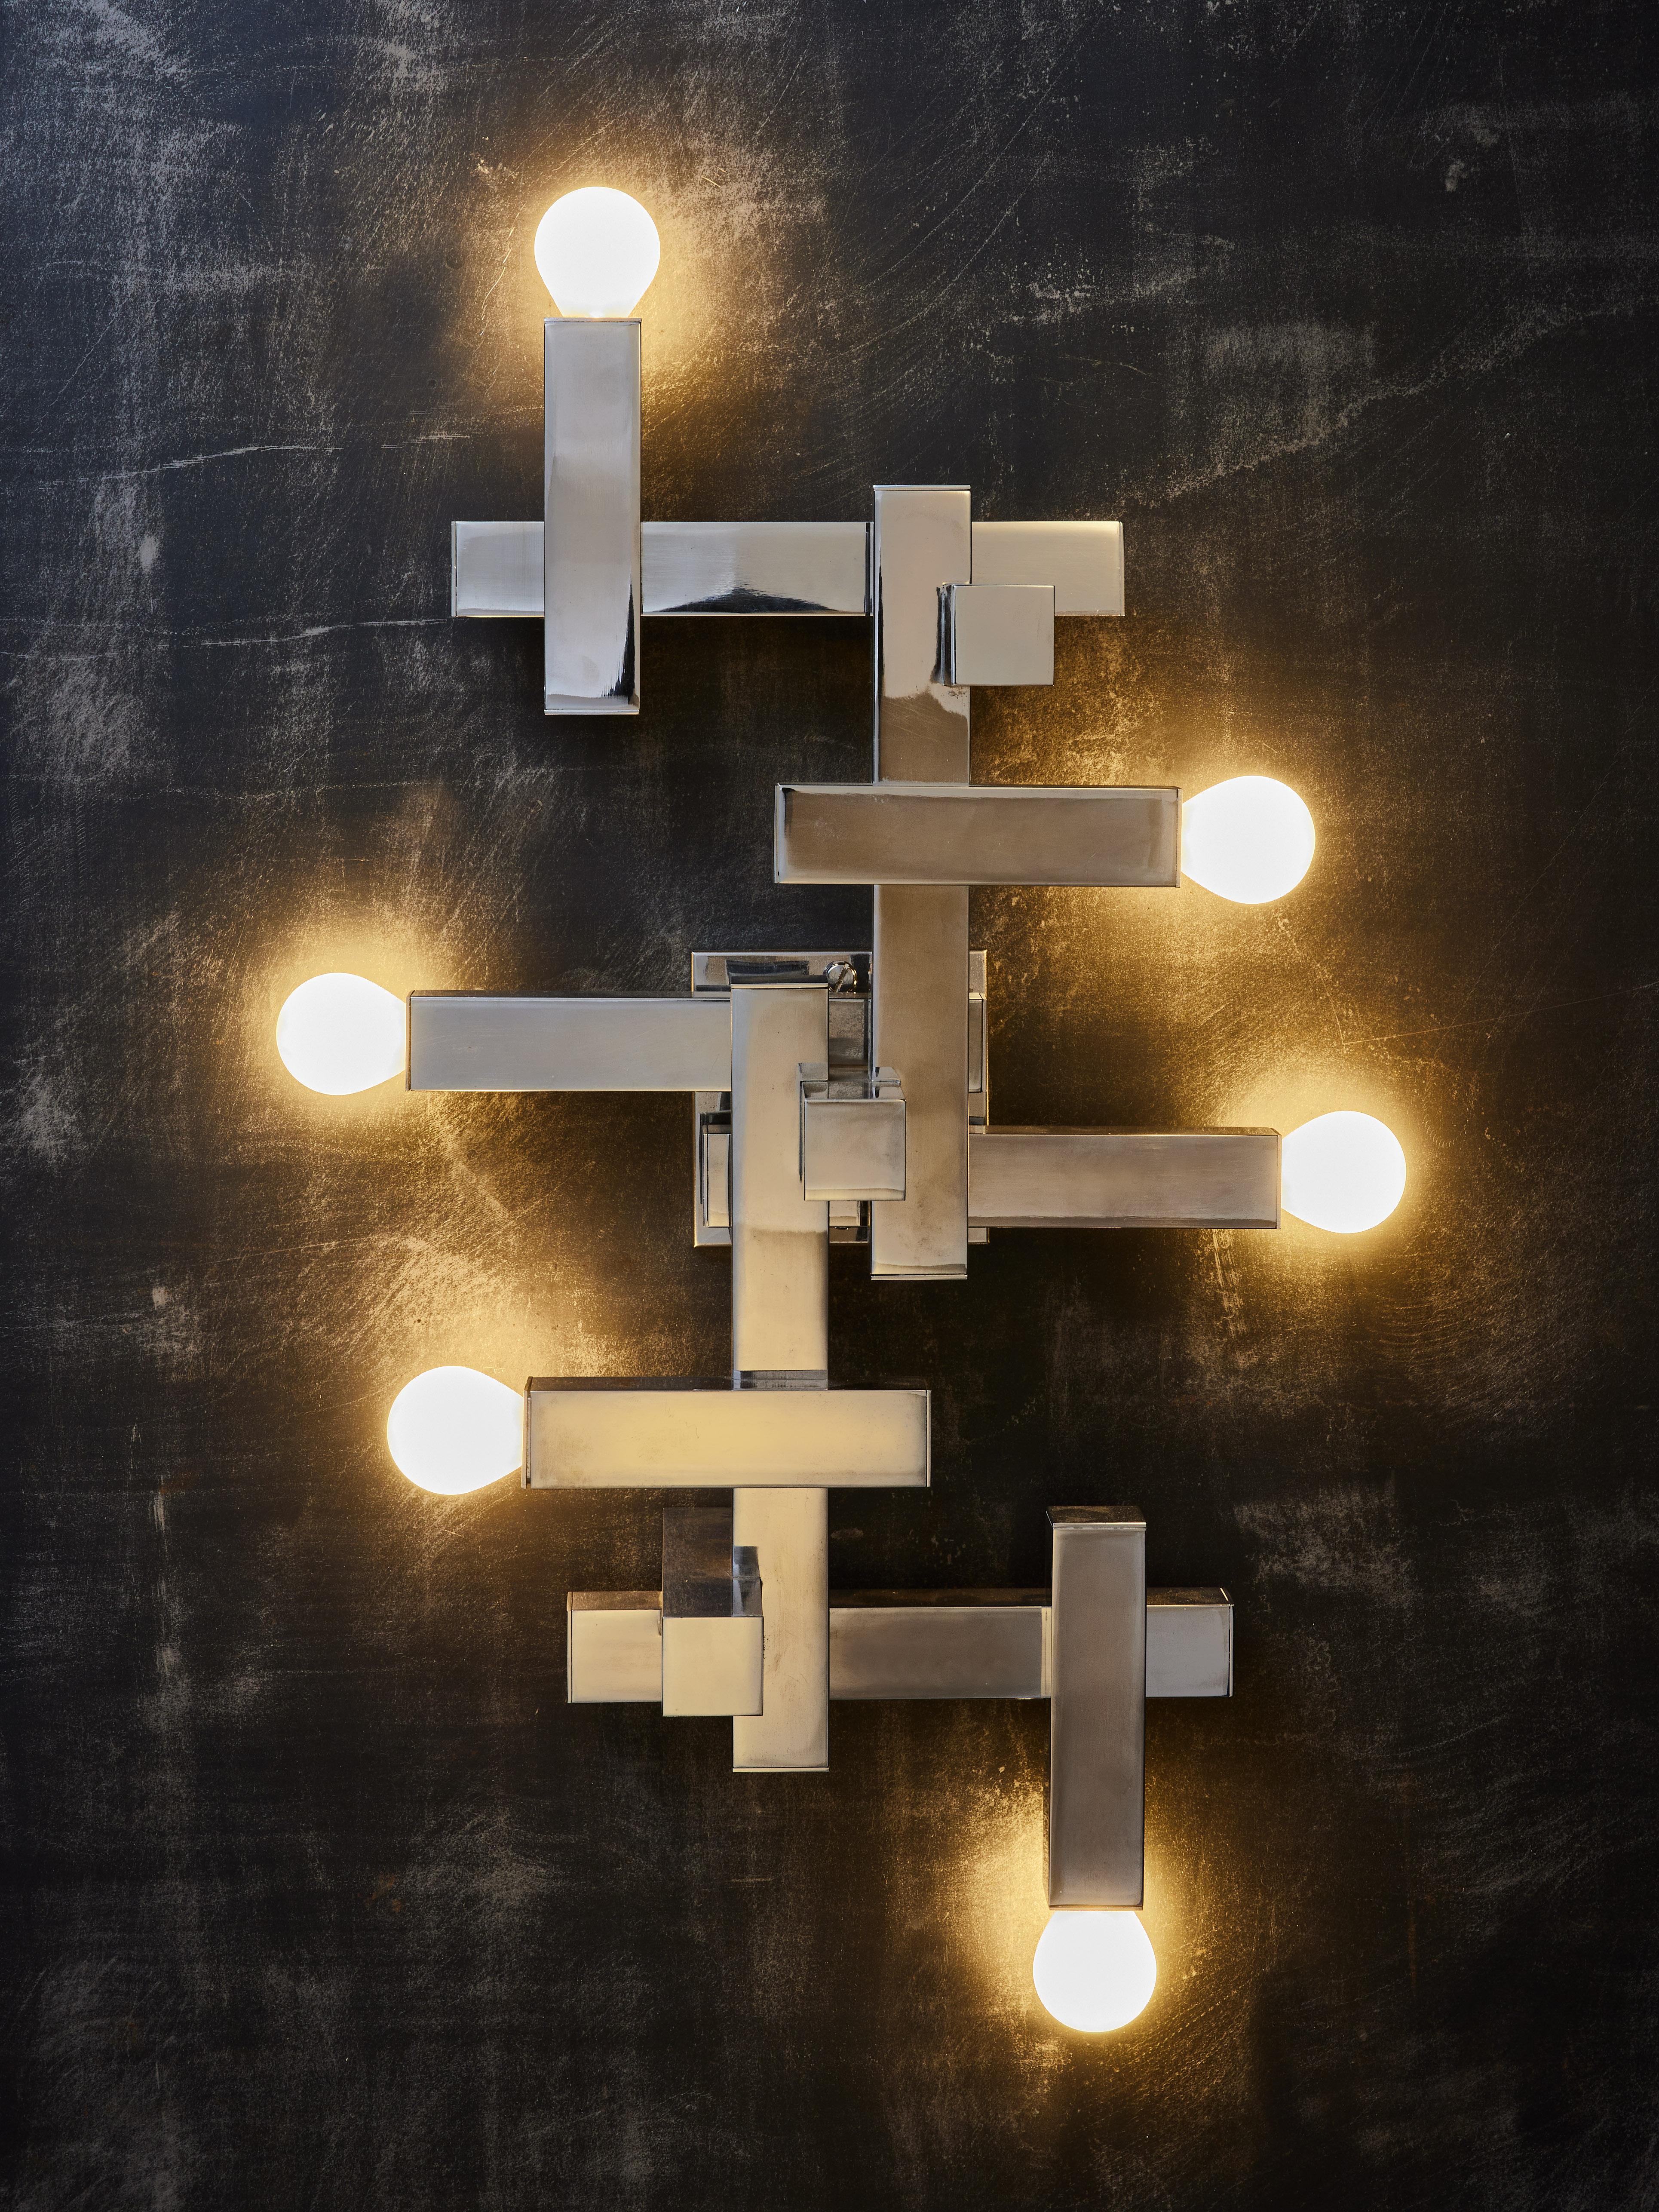 Pair of cubist wall sconces by Gaetano Sciolari made of square tubes geometrically assembled from which come out six sources of light. Can also be attached to the ceiling as a flush mount. Original maker sticker at the back.